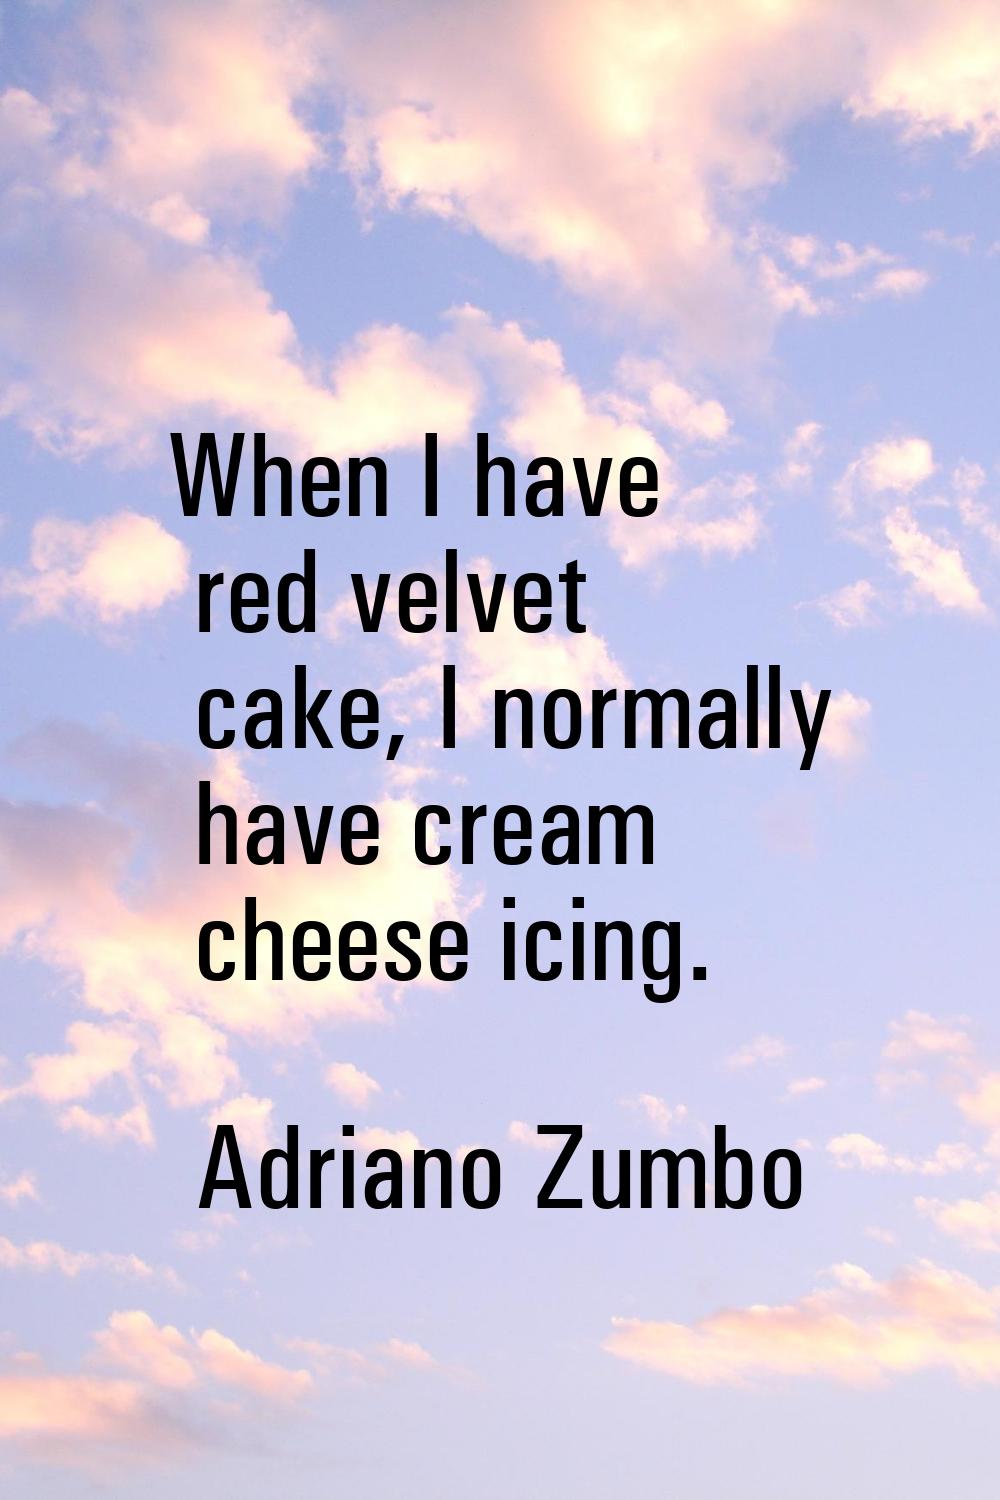 When I have red velvet cake, I normally have cream cheese icing.